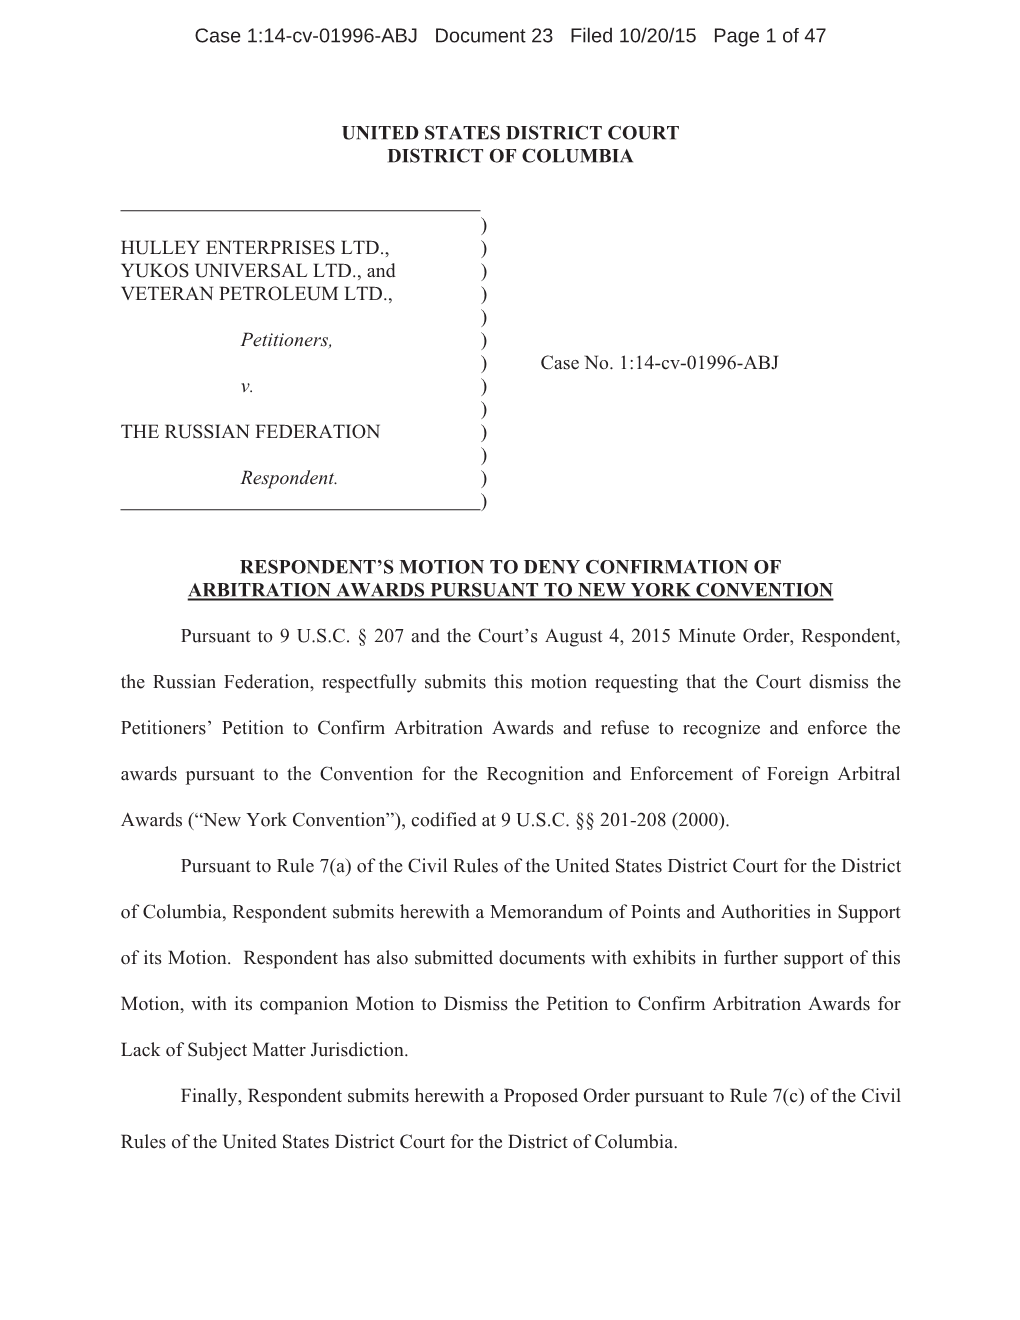 Case 1:14-Cv-01996-ABJ Document 23 Filed 10/20/15 Page 1 of 47